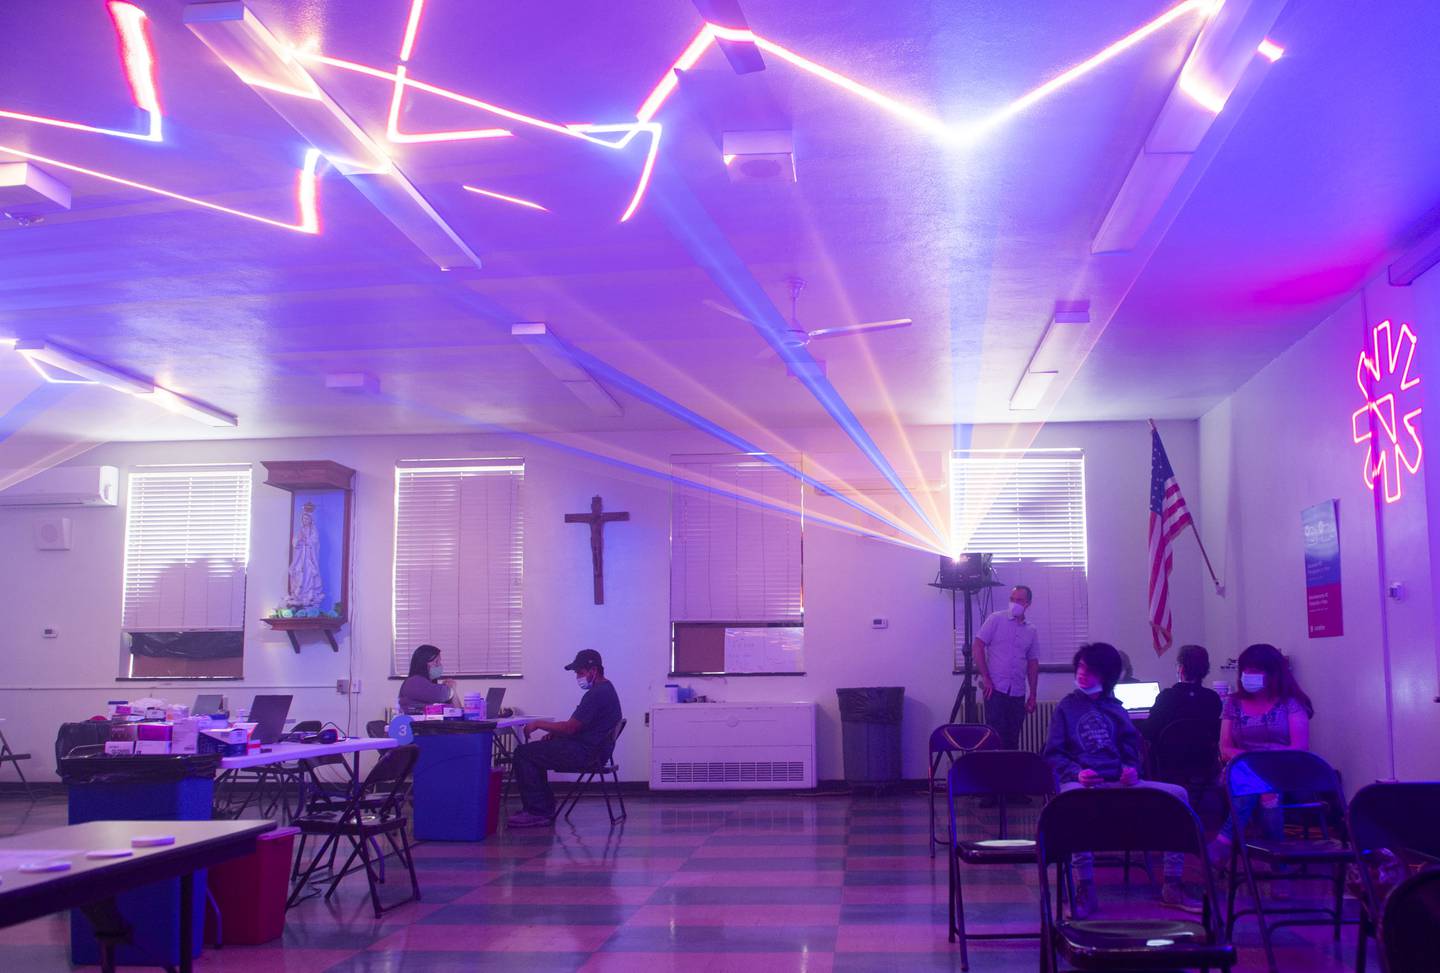 People sit and wait, Monday, May 17, 2021, at a COVID-19 vaccination clinic at St. Patrick Catholic Church in Canonsburg, Pa., which featured laser beams and music. George Dodworth, of Lightwave International, helped set up the vaccination site and decided to add lasers and music to try to make it more fun and ease some of the apprehension and anxiety younger groups might feel while getting the vaccine. (Emily Matthews/Pittsburgh Post-Gazette via AP)